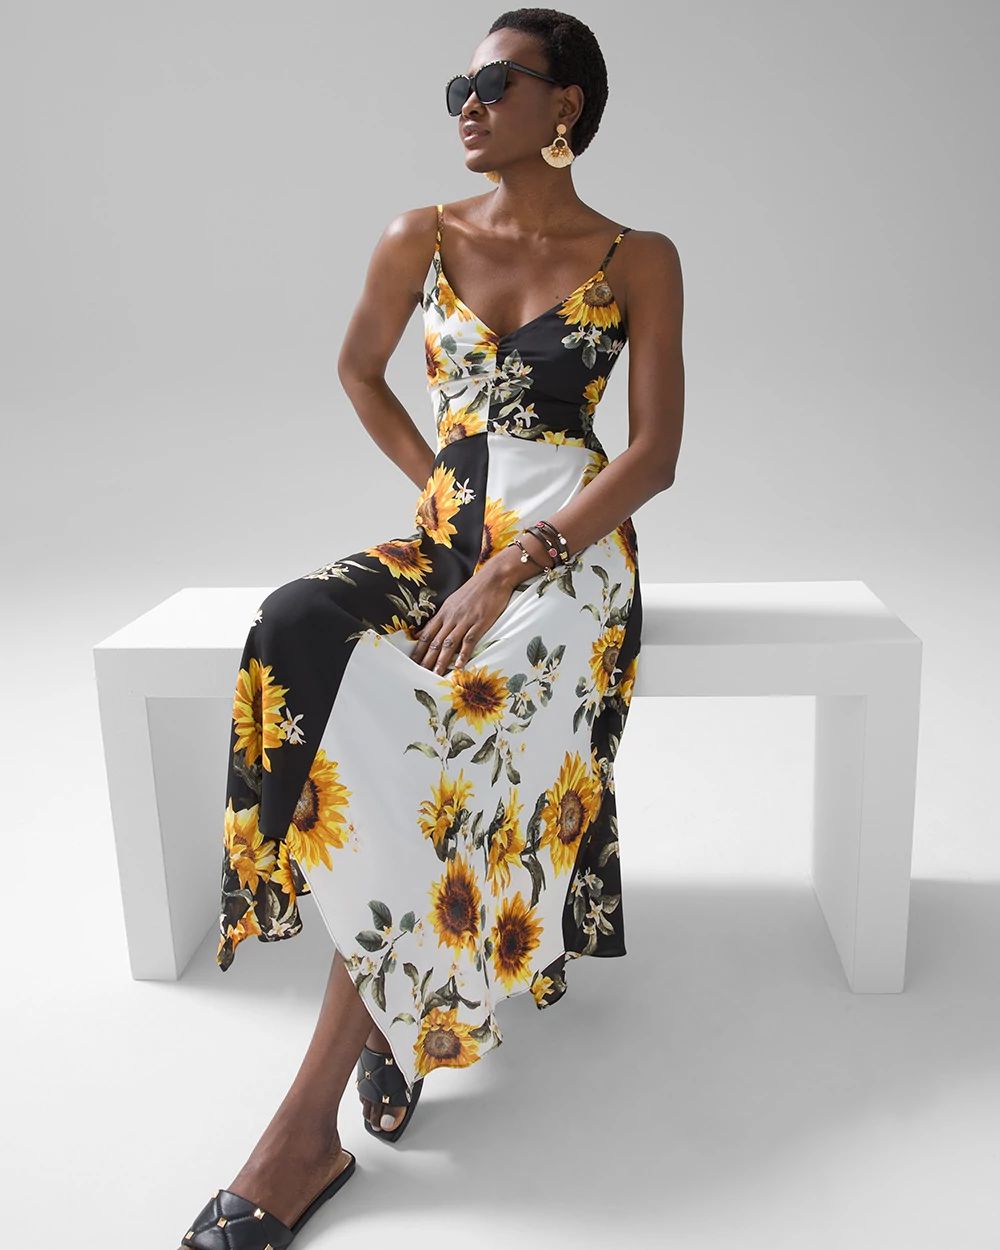 Sunflower Print Midi Dress click to view larger image.